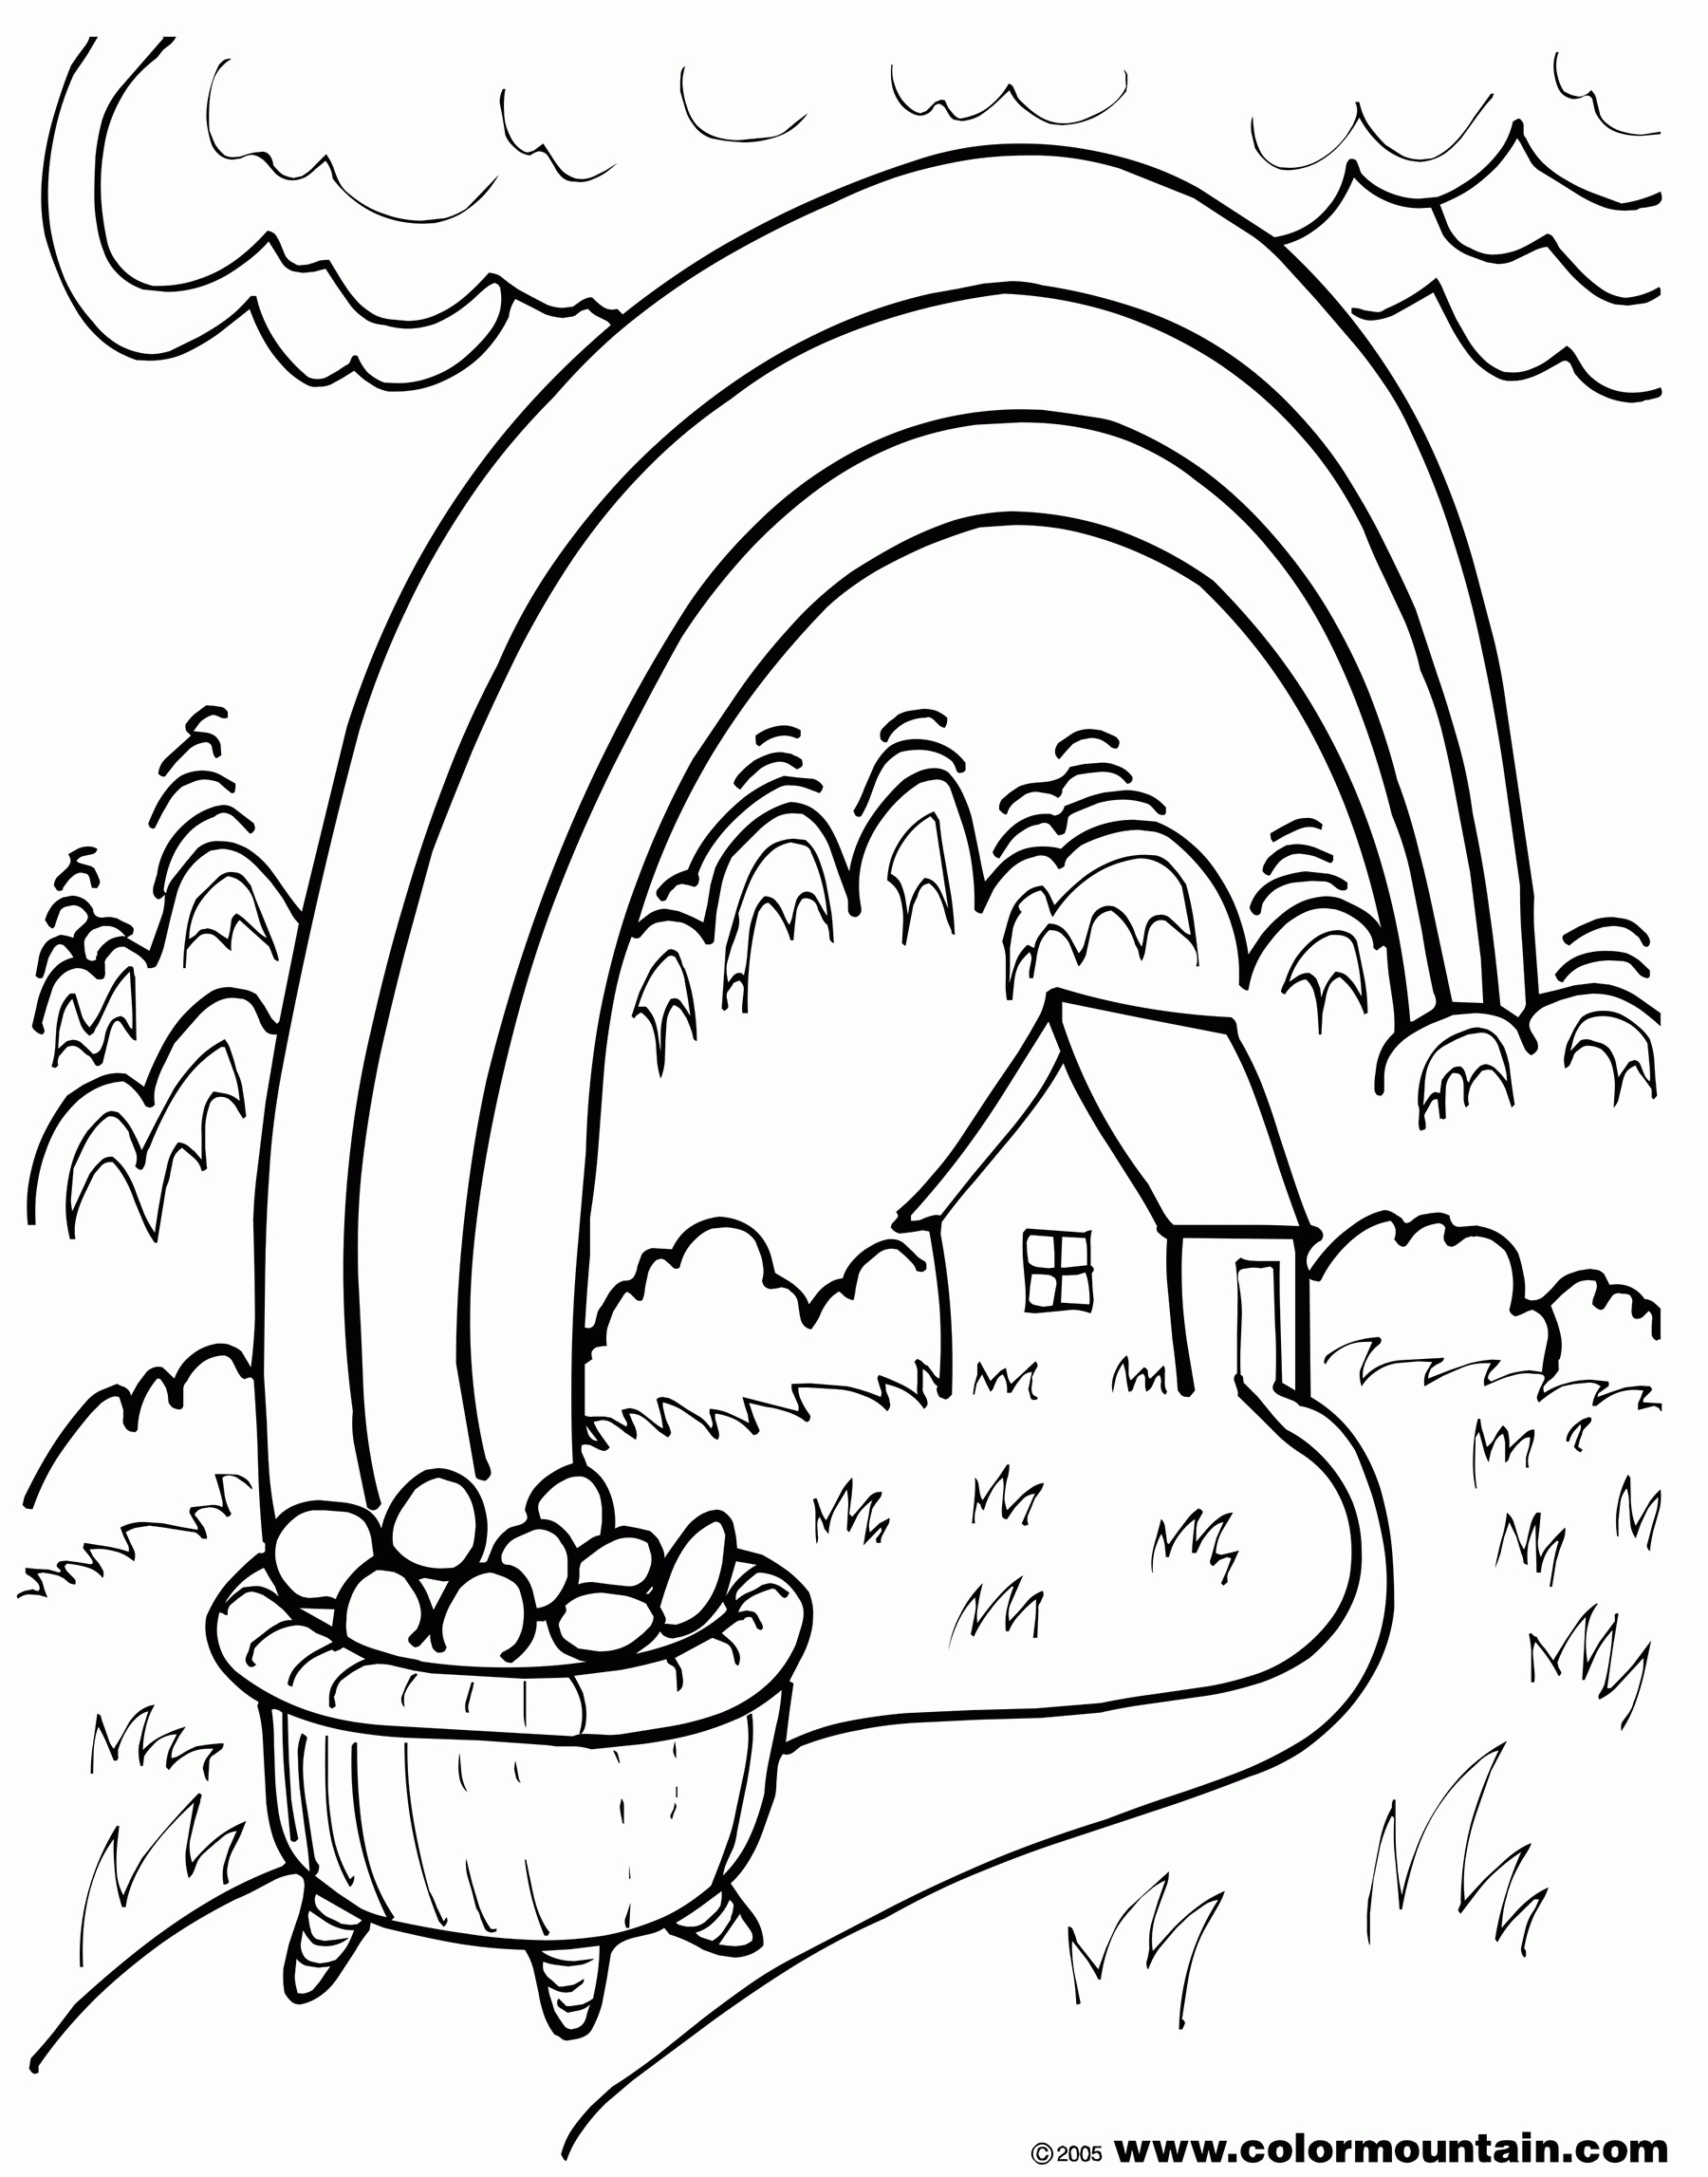 Rainbow With Pot Of Gold Coloring Pages - Coloring Home - Free Printable Pot Of Gold Coloring Pages